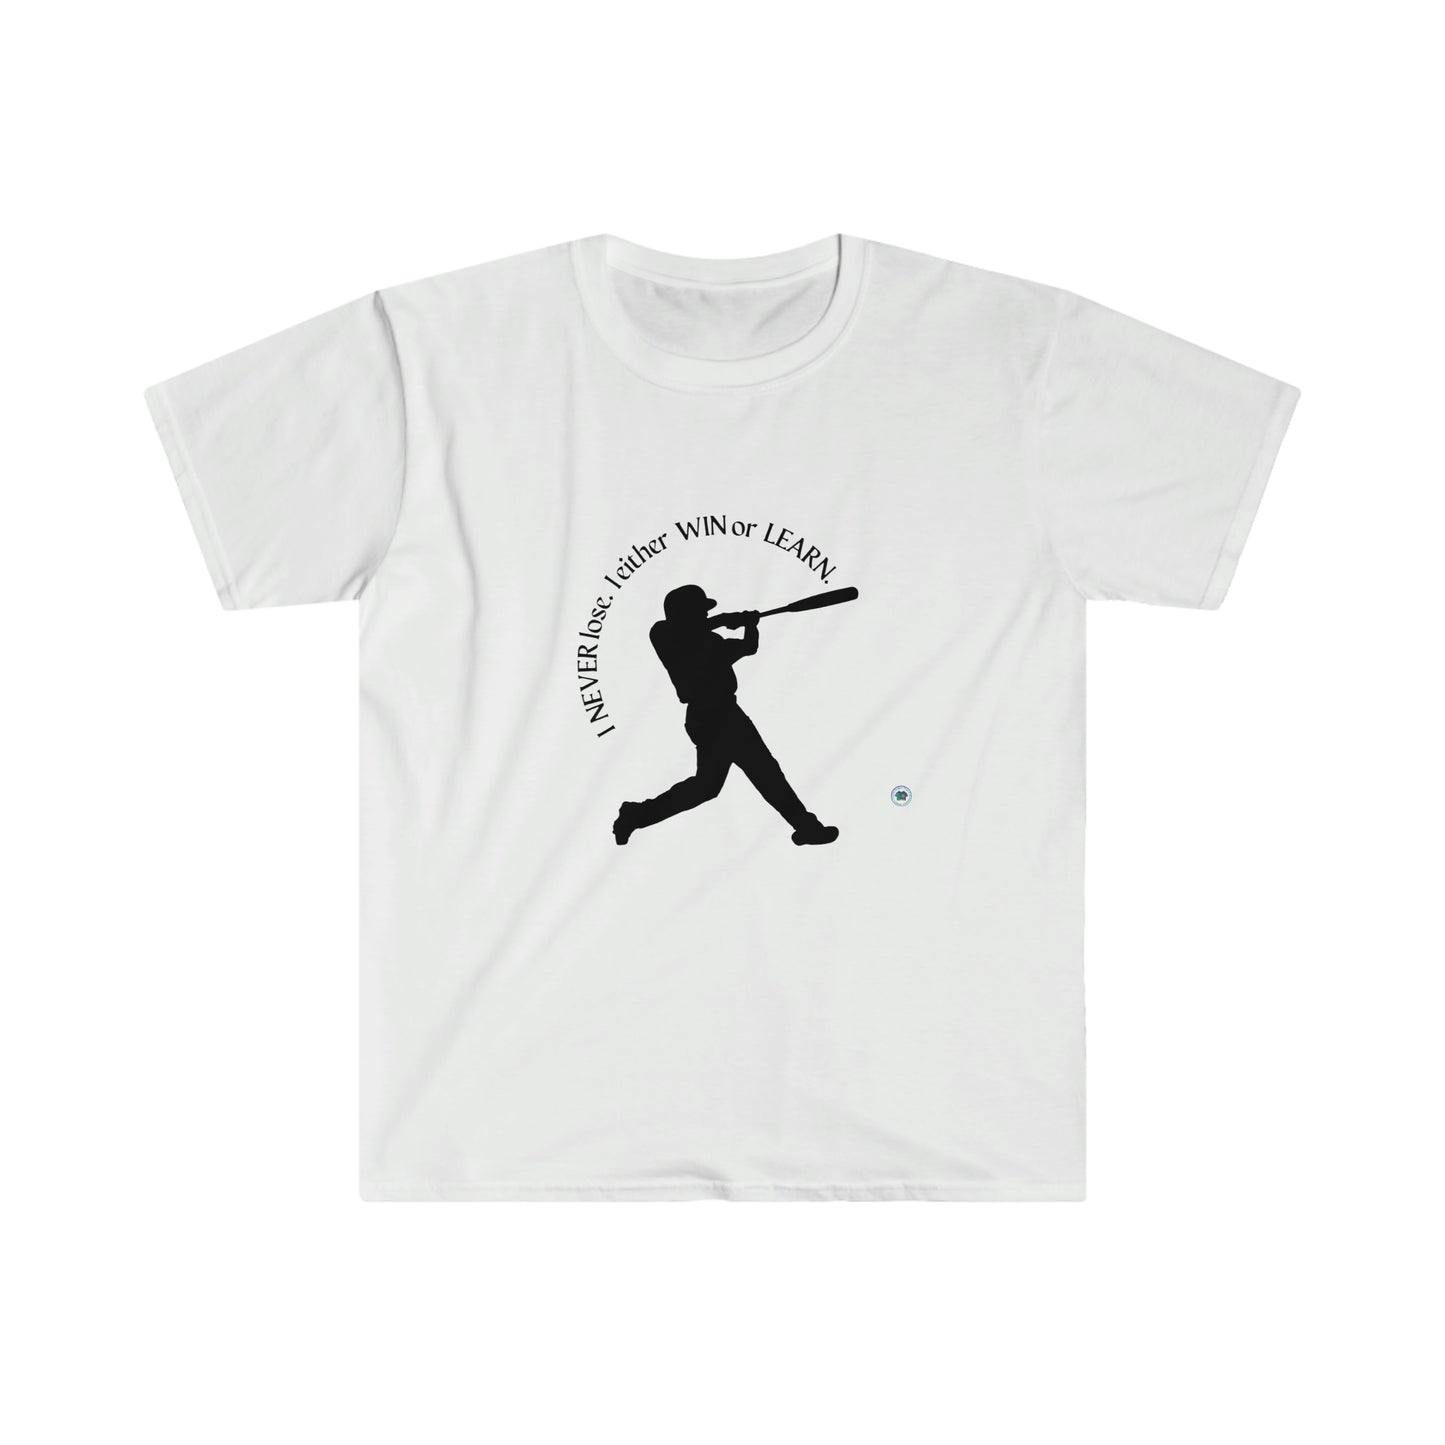 Baseball. ‘I never lose. I either win or learn’ Unisex Softstyle T-Shirt